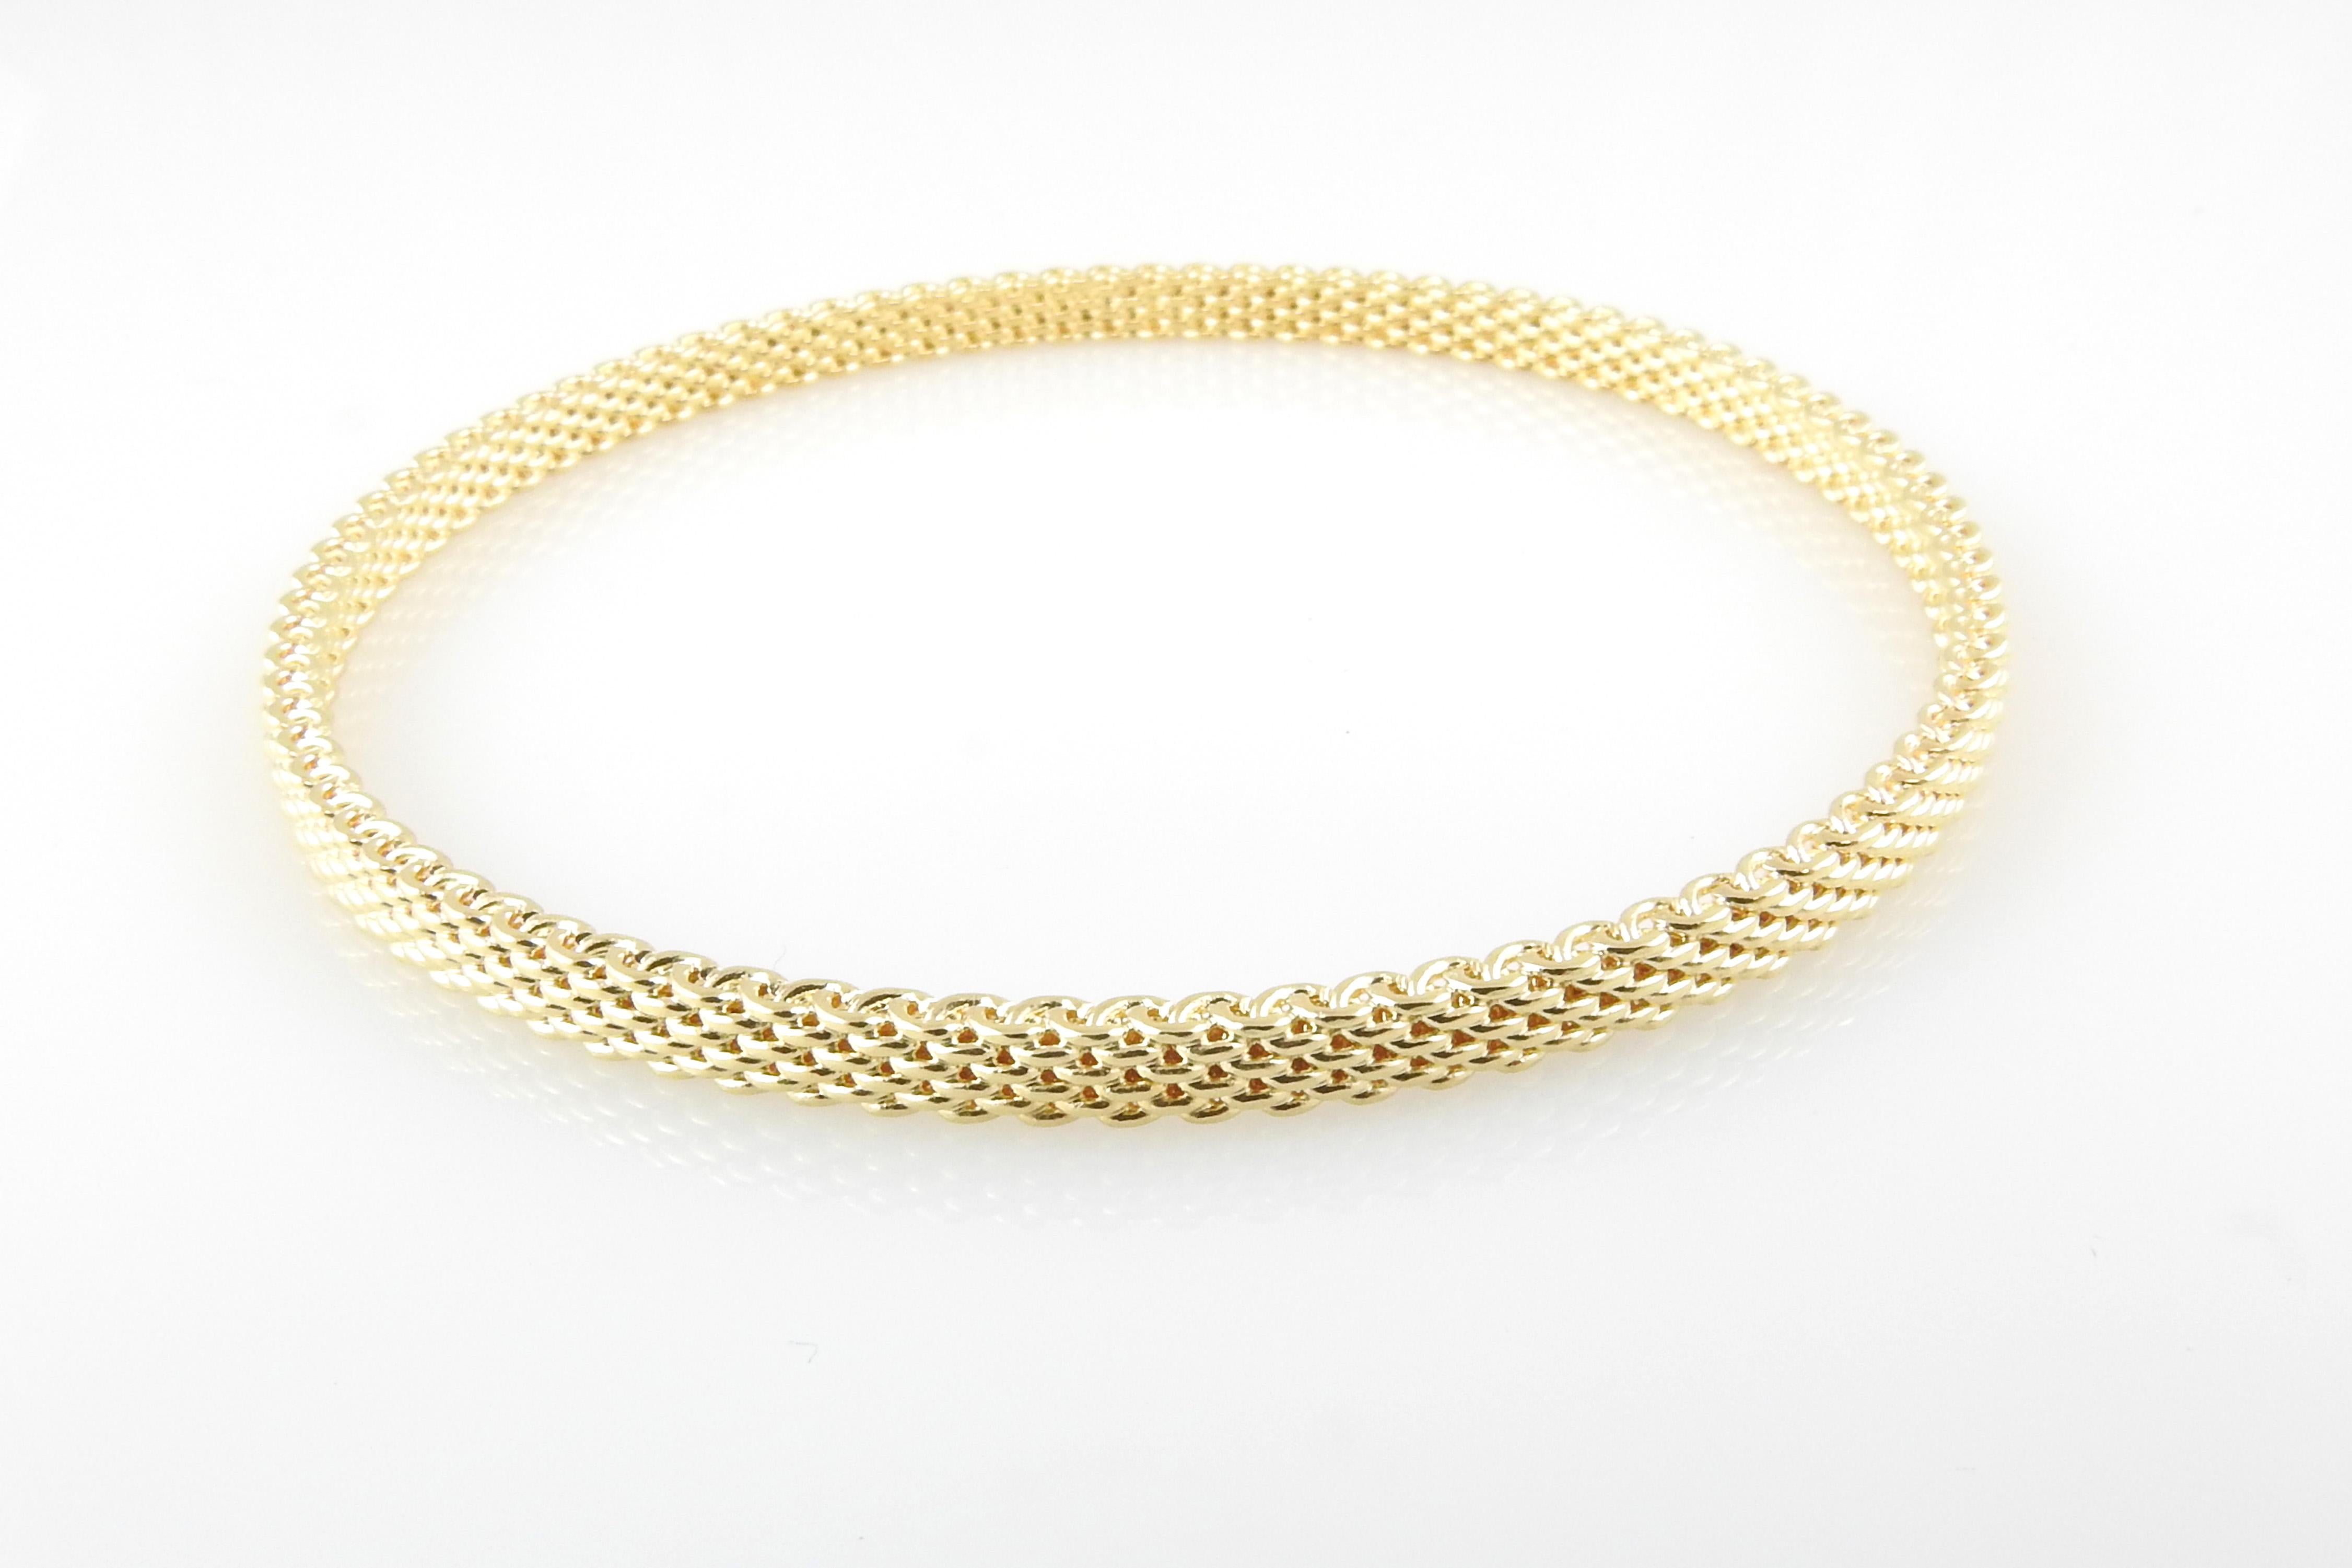 Tiffany & Co. 18K Yellow Gold Somerset Mesh Bracelet

This beautiful Tiffany & Co. mesh bangle bracelet is set in 18K yellow gold.

**Matching bracelets available in our store in rose and white gold**

Bracelet is approx. 4mm wide, and 8